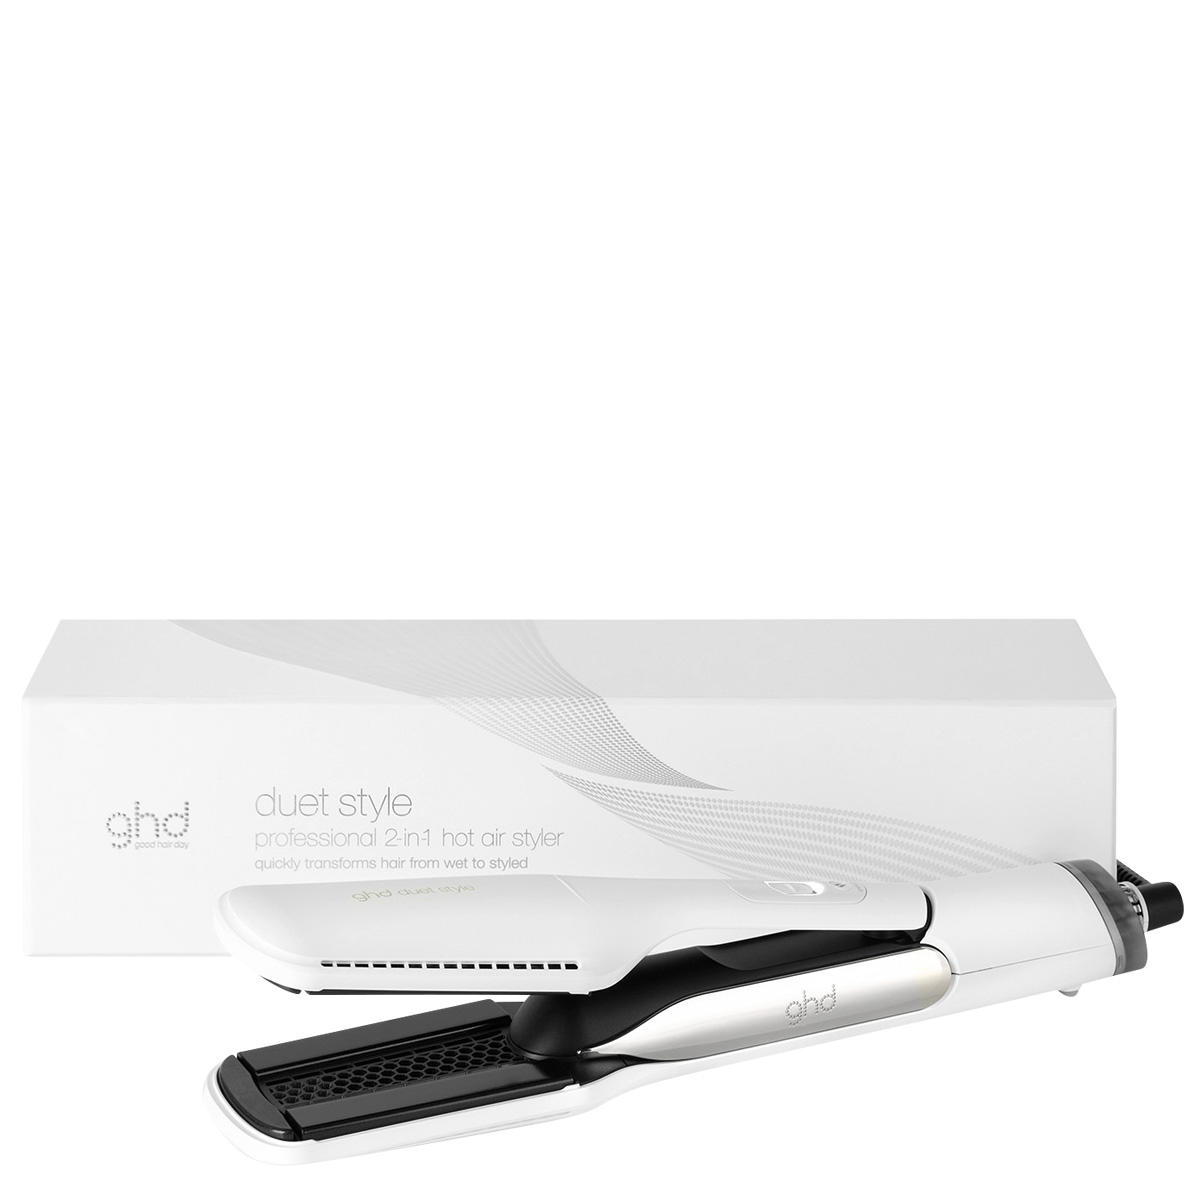 ghd Hot Air Styler duet style 2-in-1 white - 3